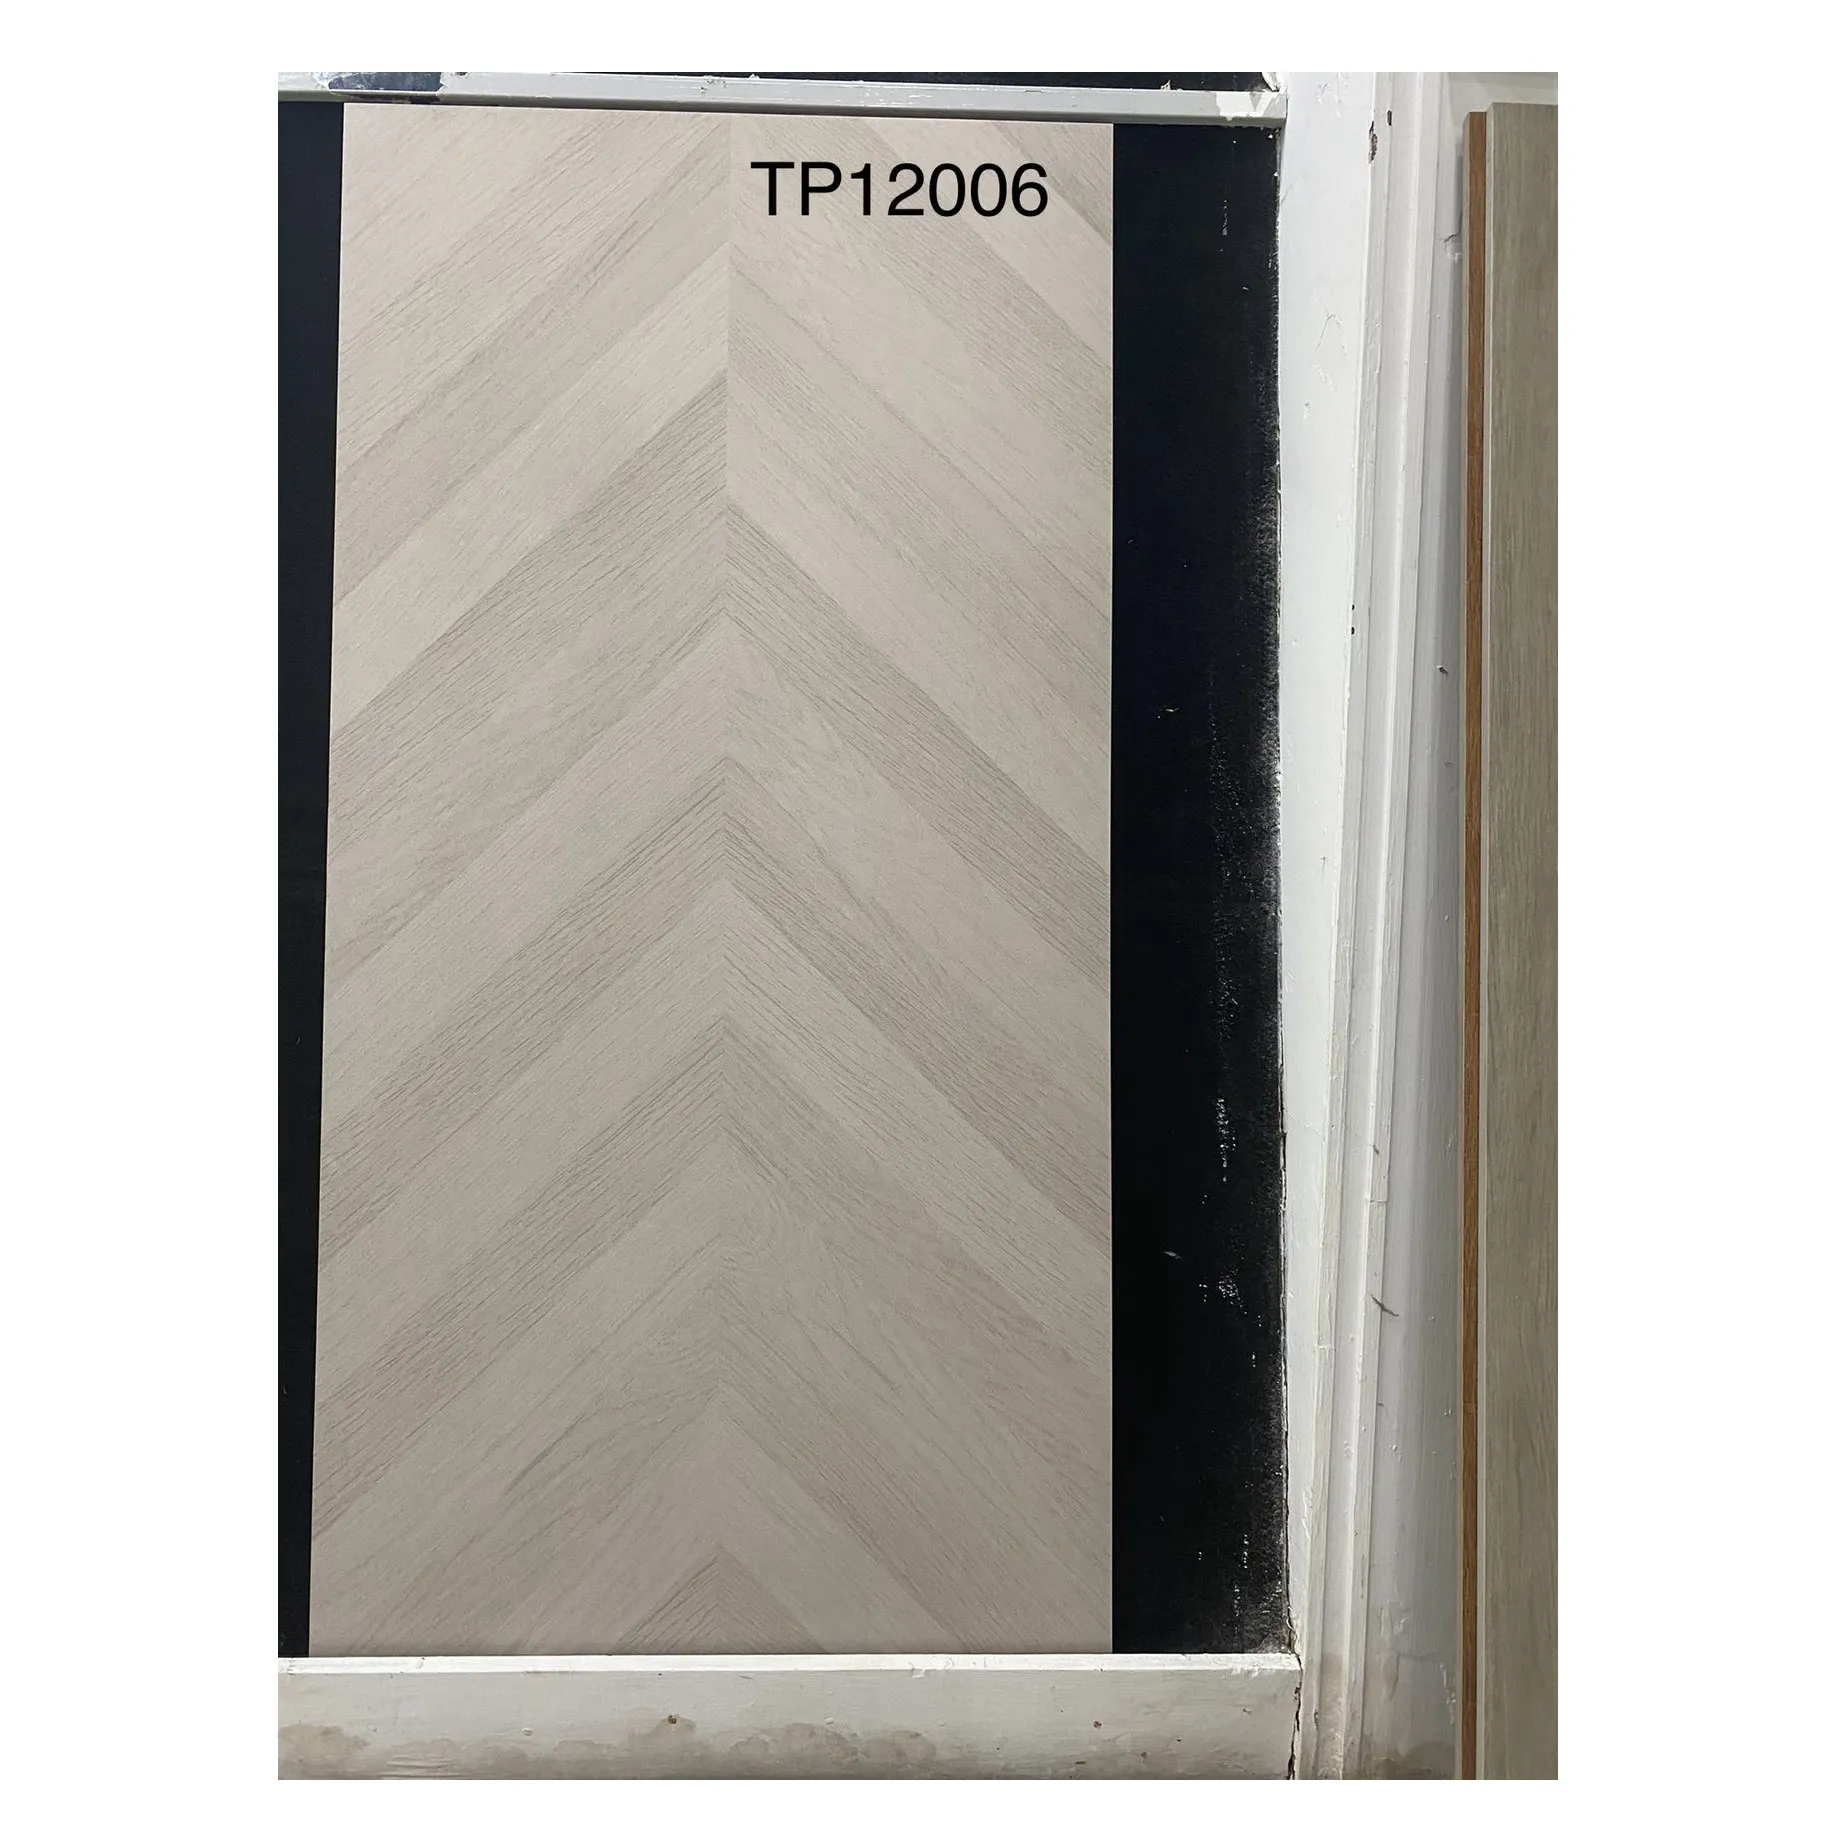 New arrival white wood finish porcelain tile stone tile with best price grain ceramic tile wood flooring look for wall and floor